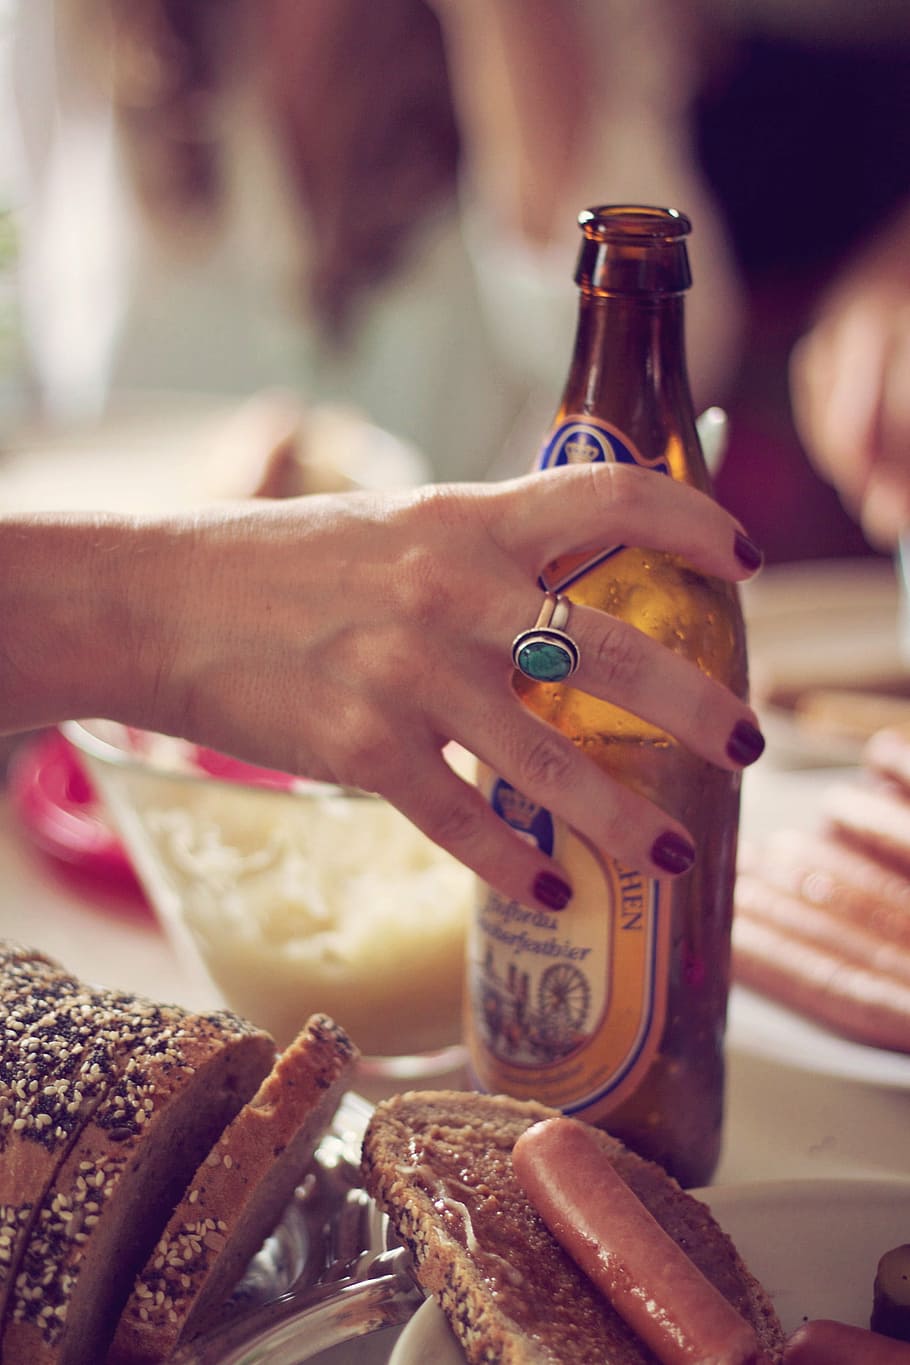 woman, hand, brown, amber, bottle, table, people, manicure, ring, beer